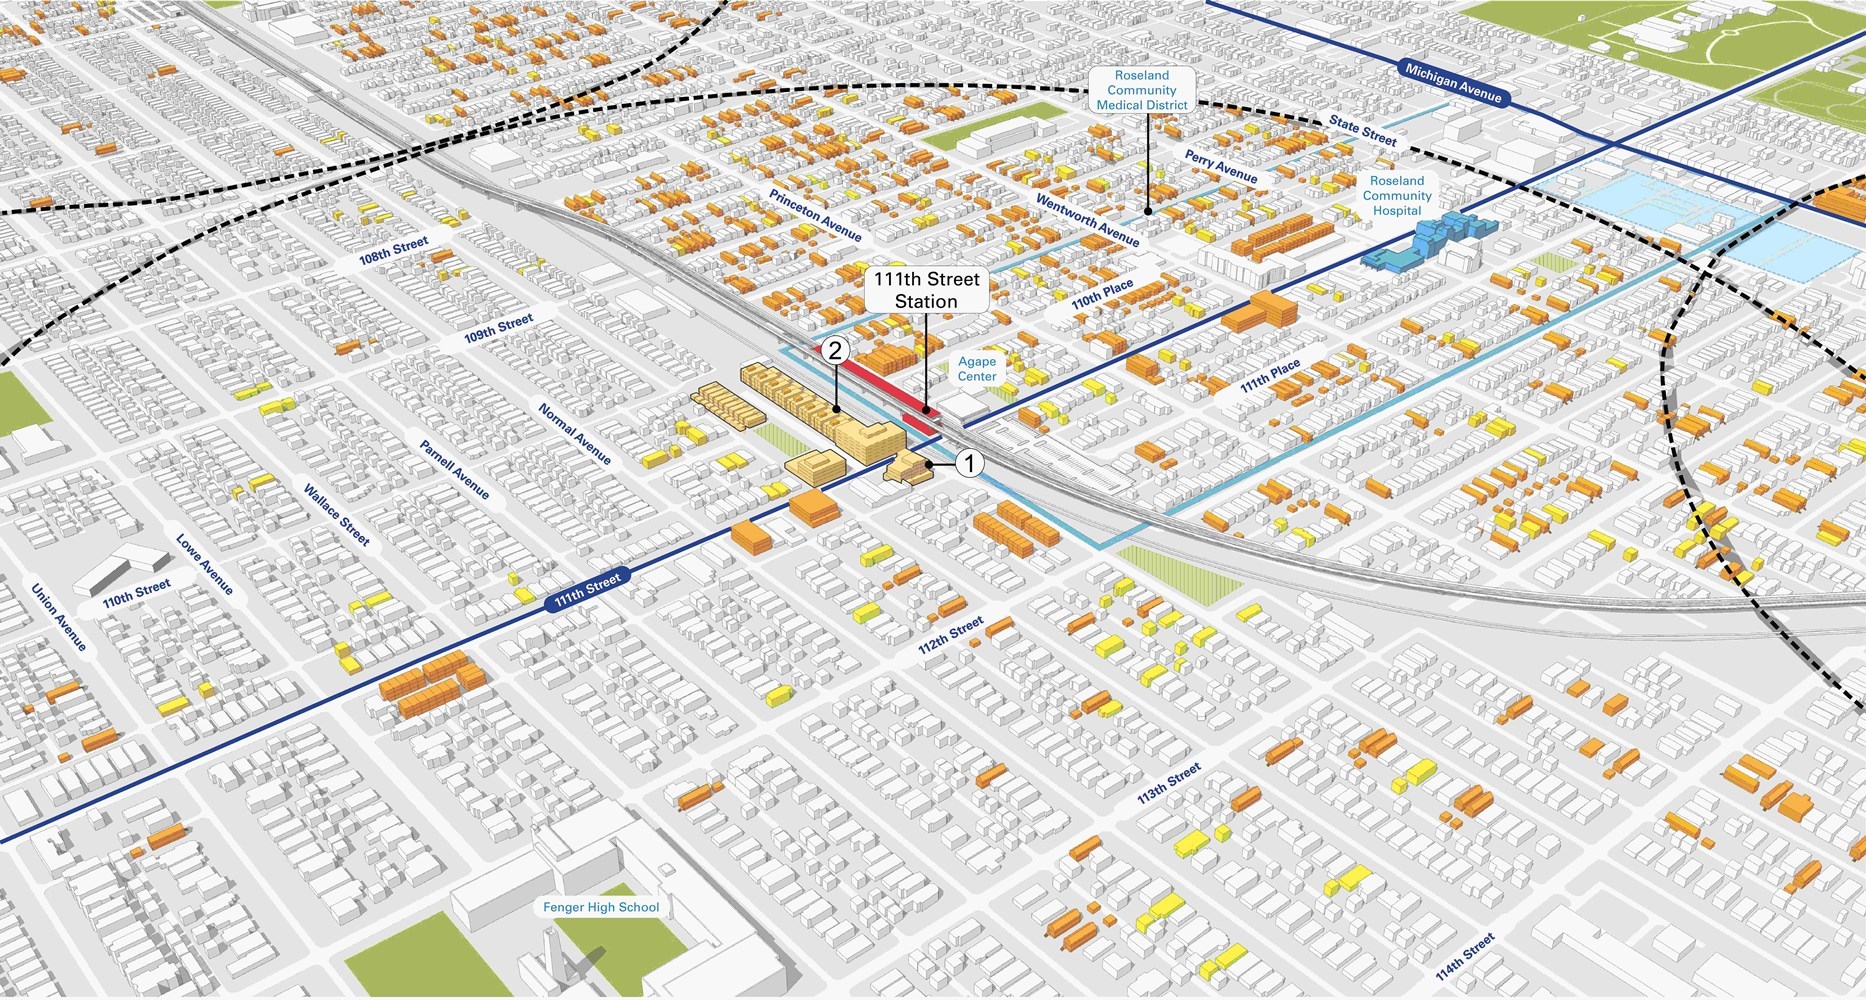 RLE_Station_Area_Development_Capacity_Massing-111th_5-Corridor_Infill_cropped